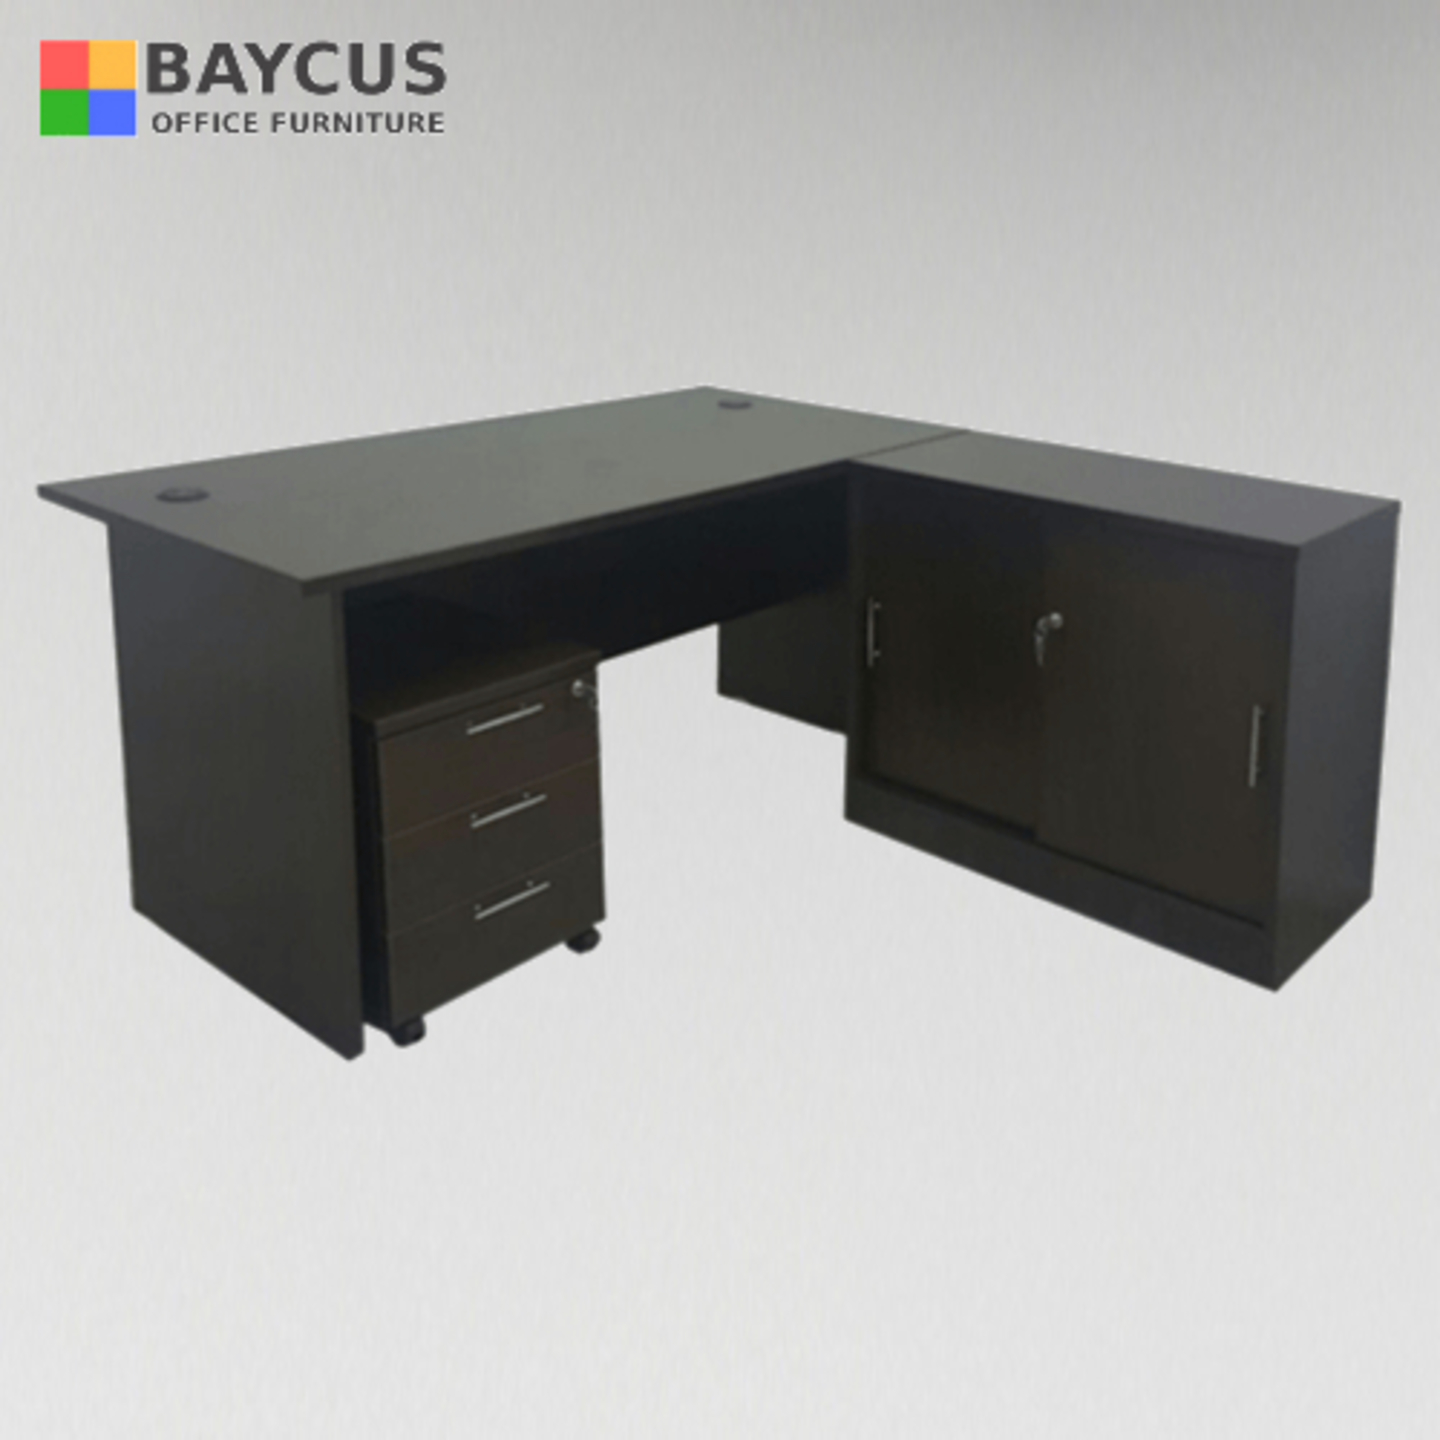 1.5m L-Shaped Table Set with Storage Cabinet